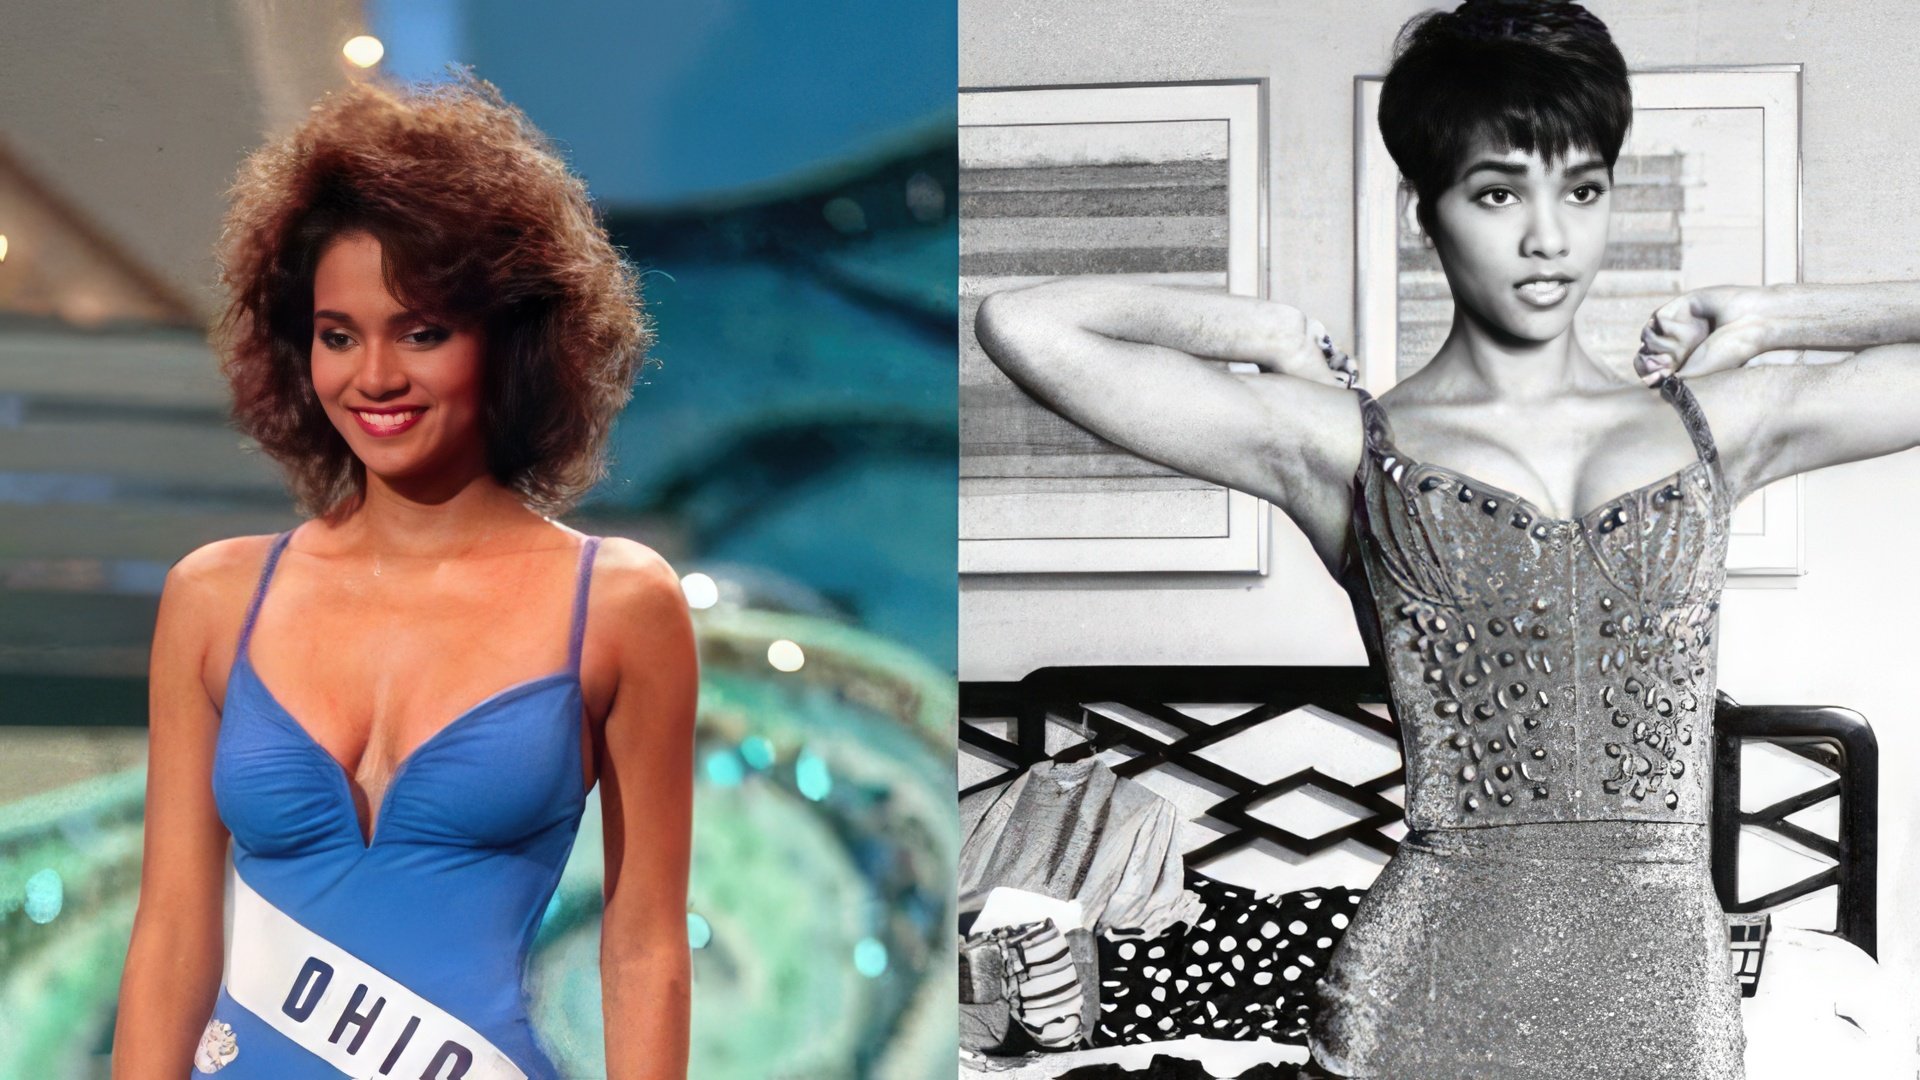 The beginning of the 80s was marked by the participation of Halle Berry in the beauty contests